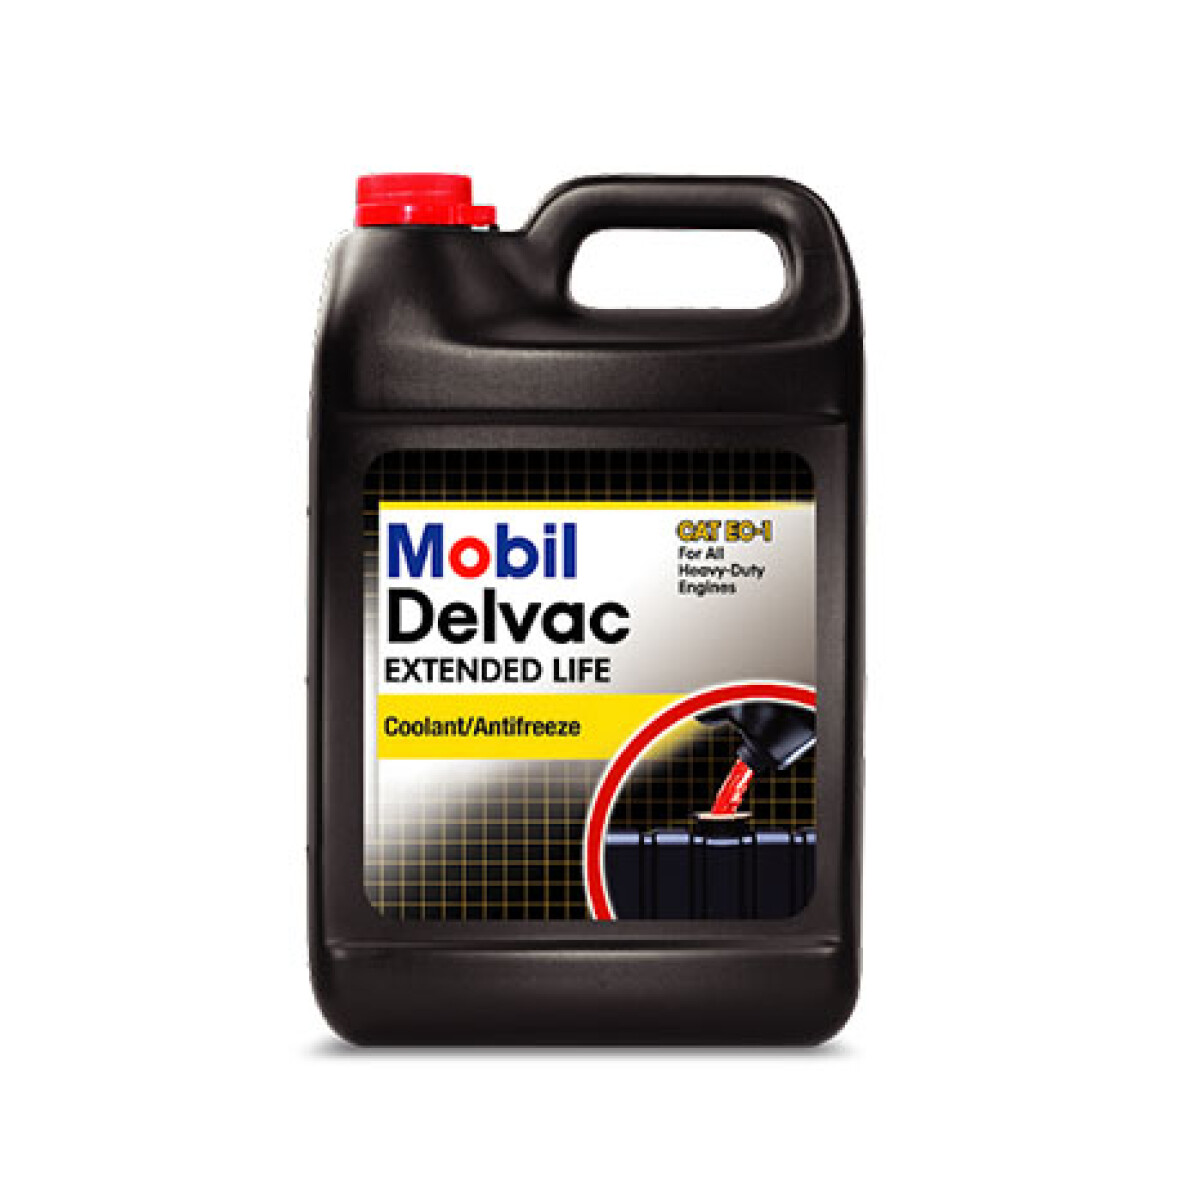 Mobil Delvac Extended Life 50/50 Coolant/Antifreeze Galón 